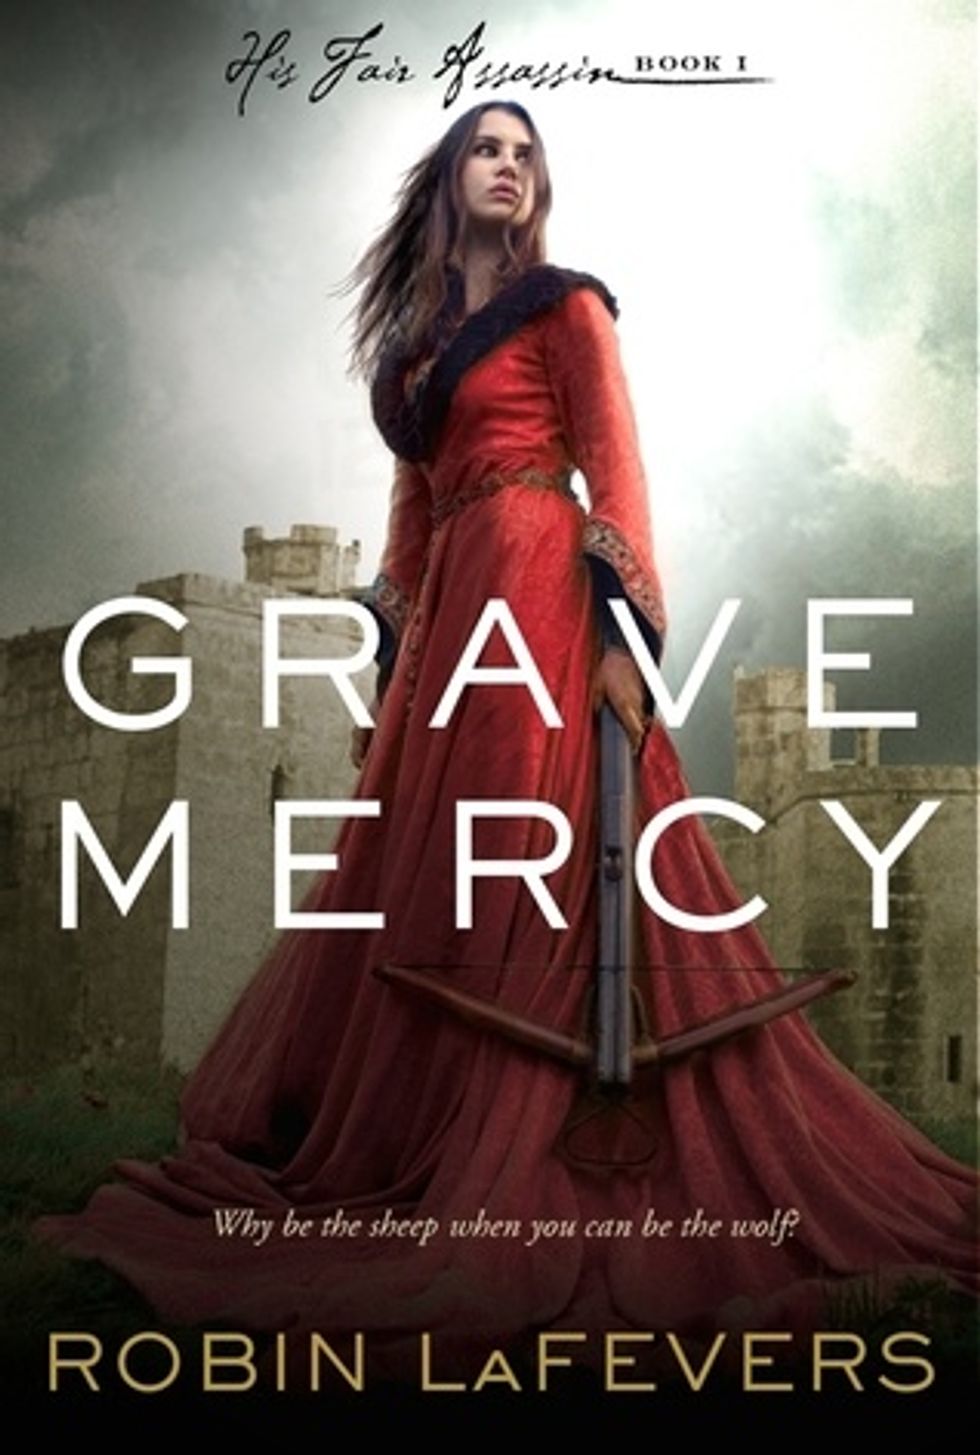 Review of Grave Mercy by Robin LaFevers